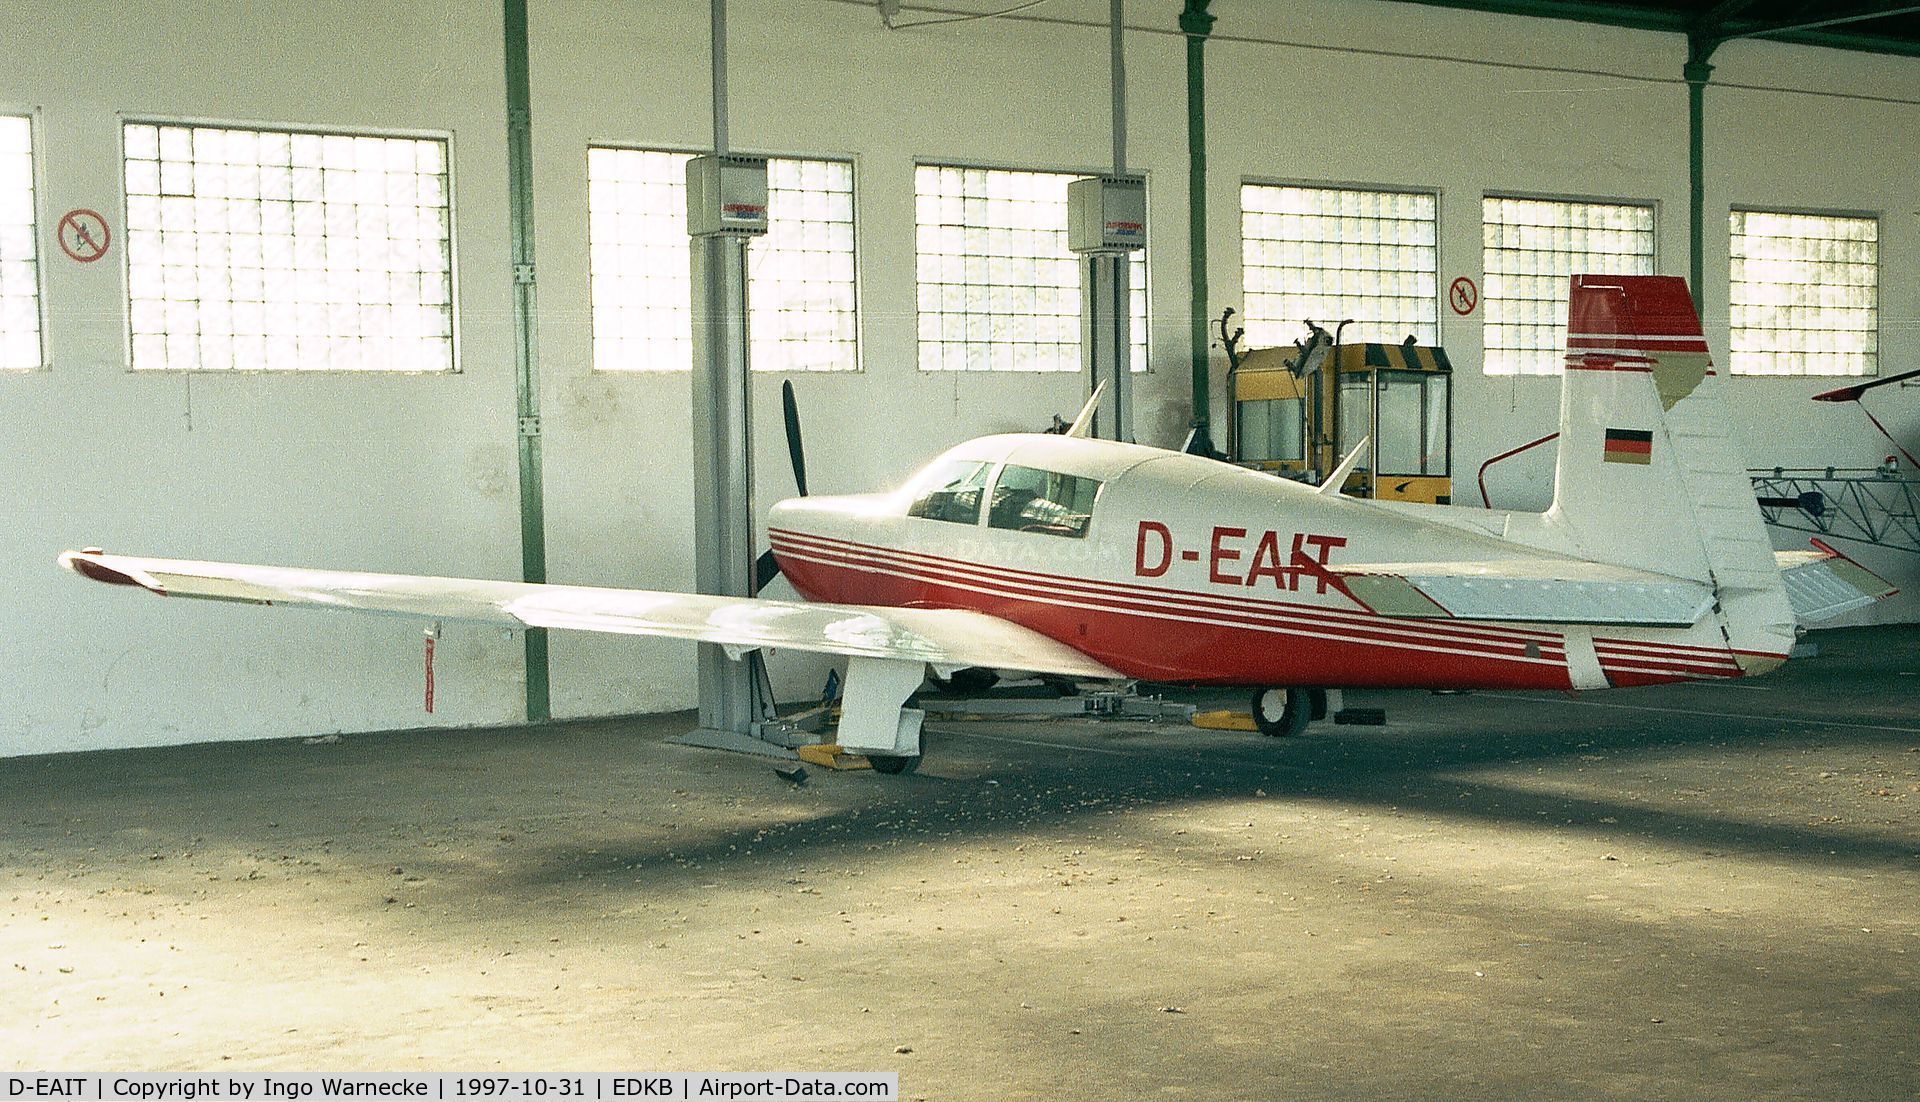 D-EAIT, 1983 Mooney M20K C/N 25-0771, Mooney M20K Model 231 at Bonn-Hangelar airfield